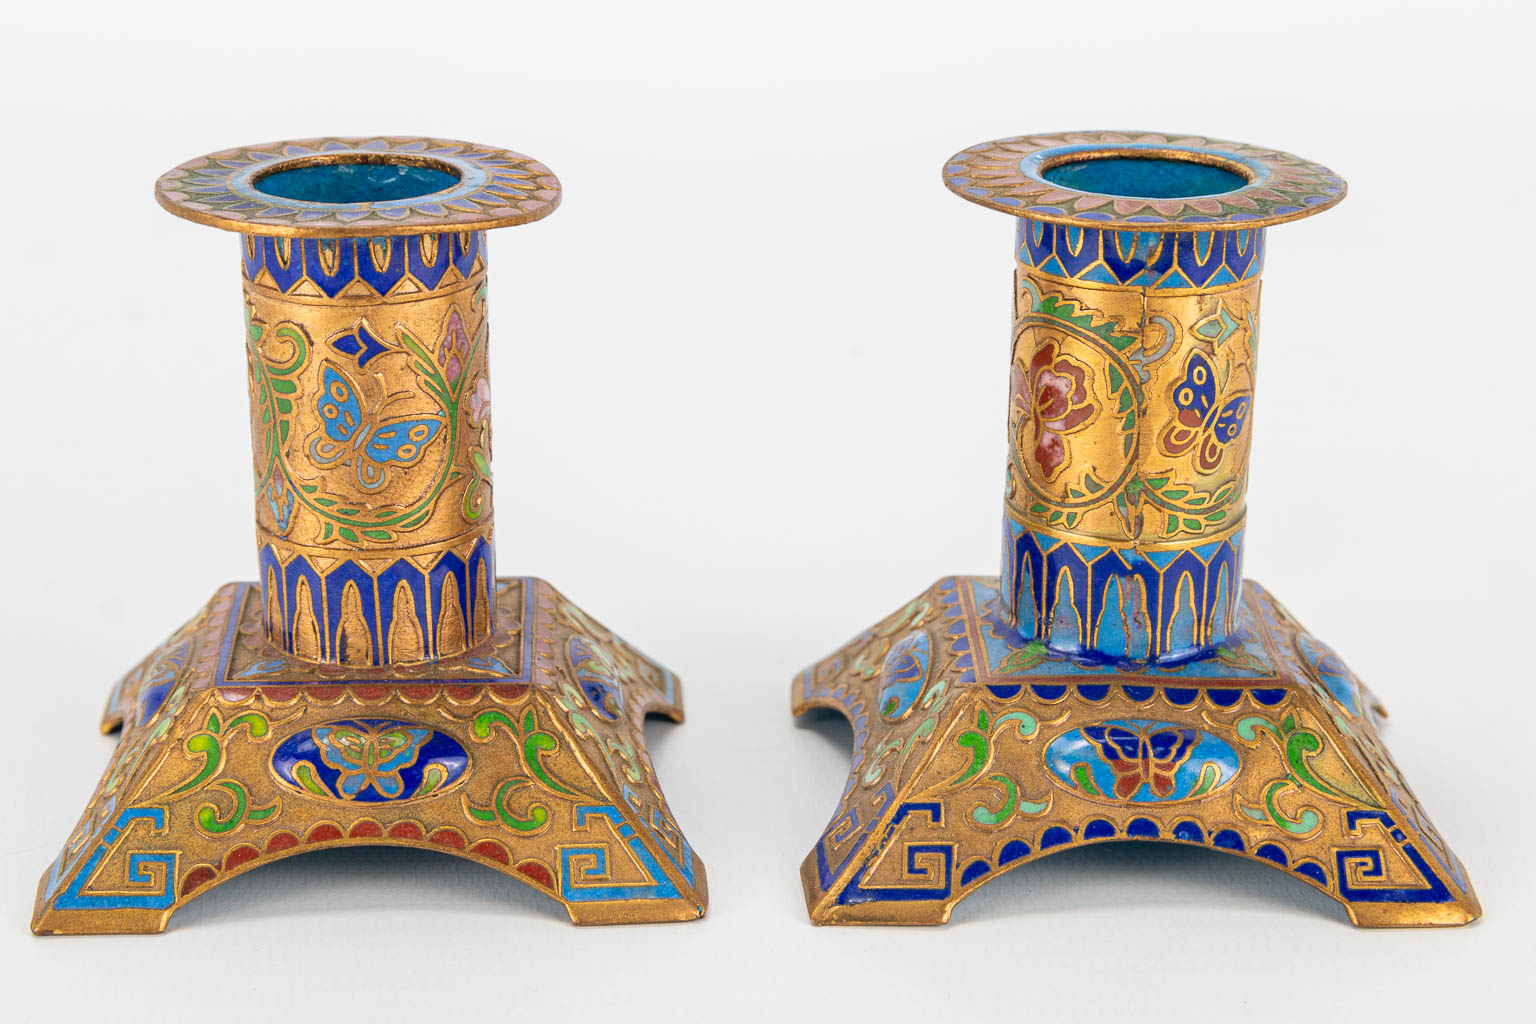 A collection of 2 jars and 2 candlesticks made of cloisonne bronze. (7 x 10 cm) - Image 12 of 16